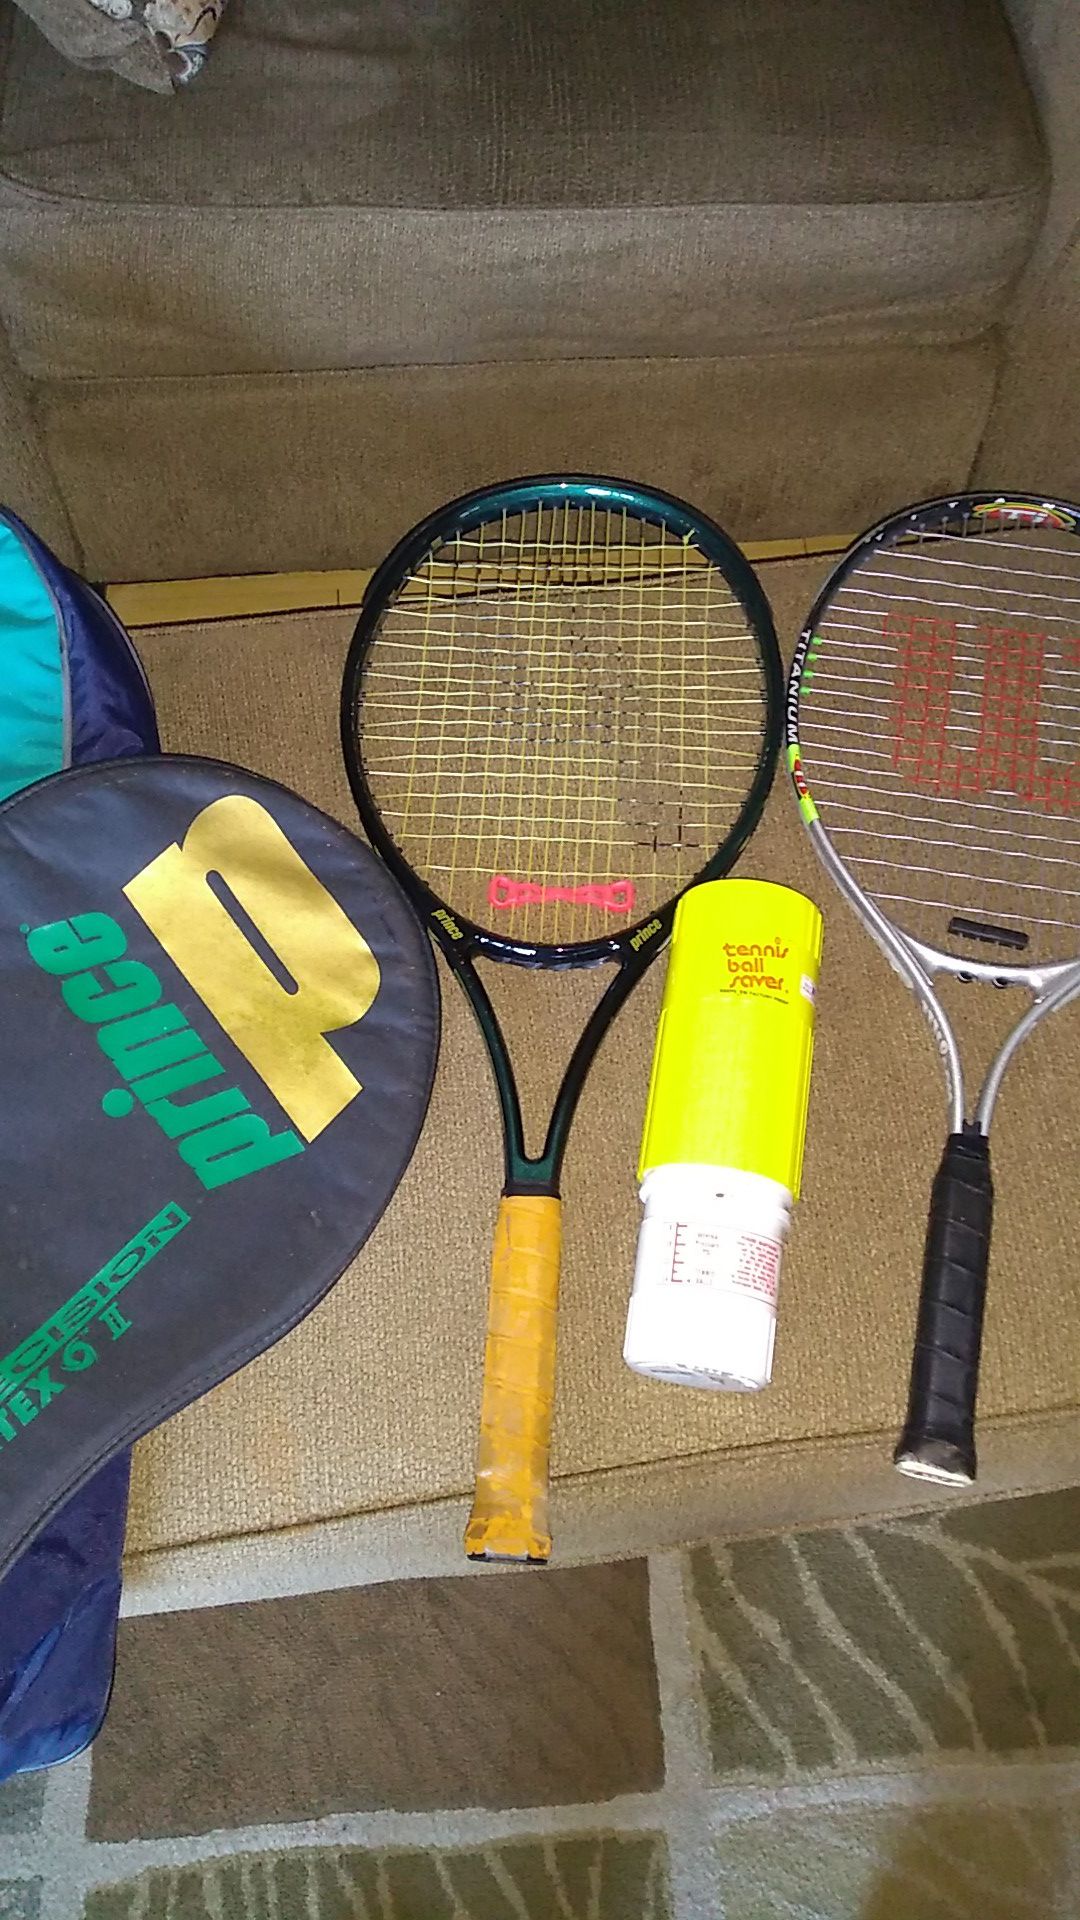 Tennis rackets and carry case.